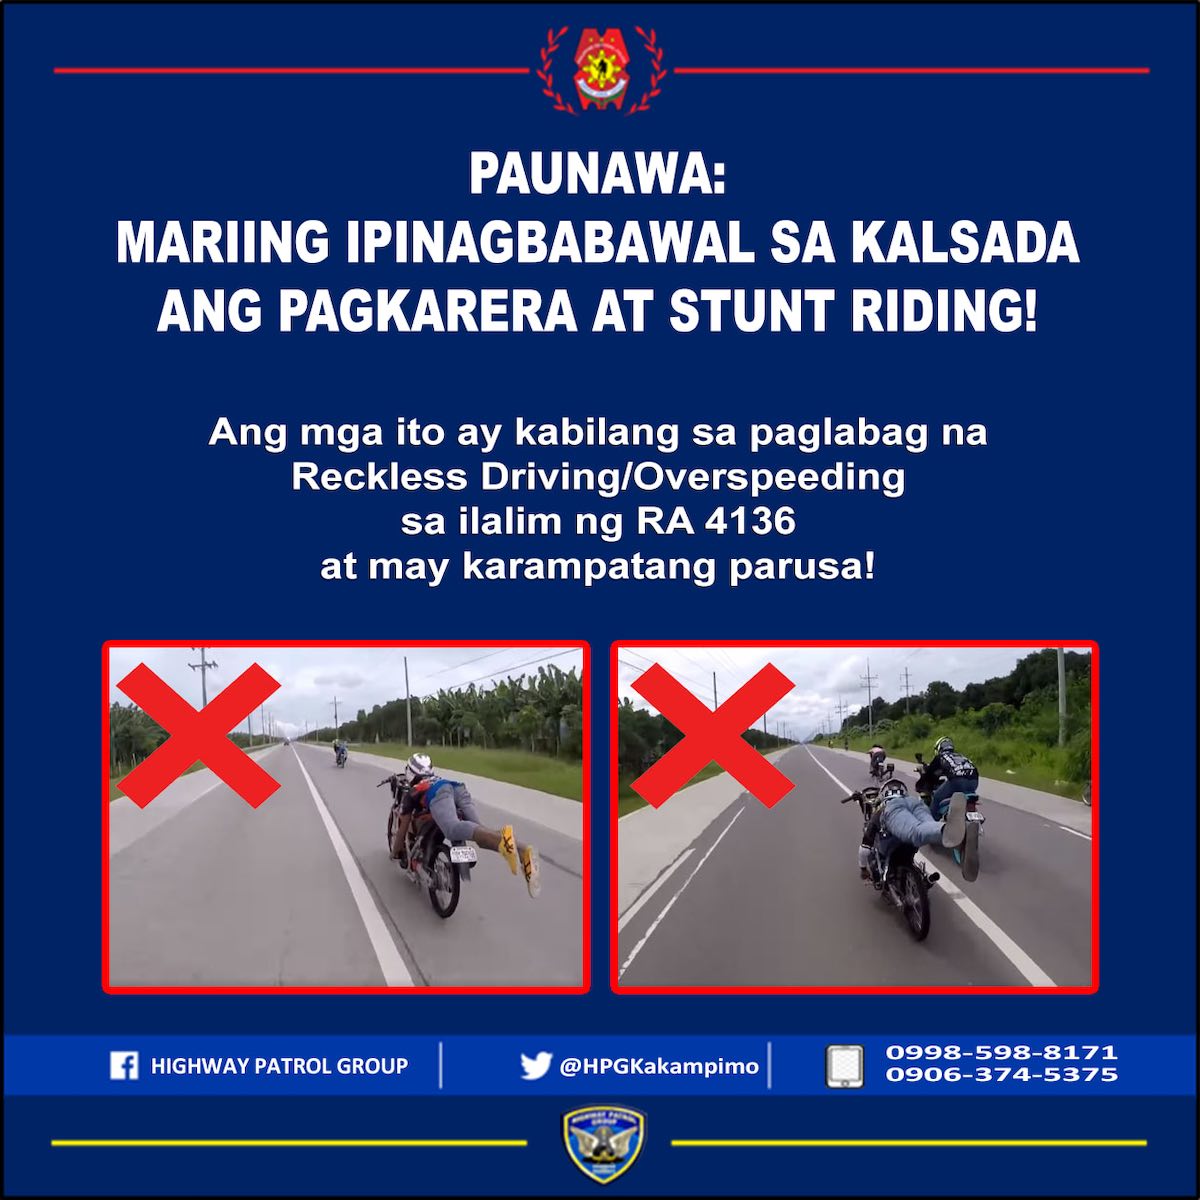 Advisory issued by the Highway Patrol Group (HPG) against motorcycle stunt riding on public roads